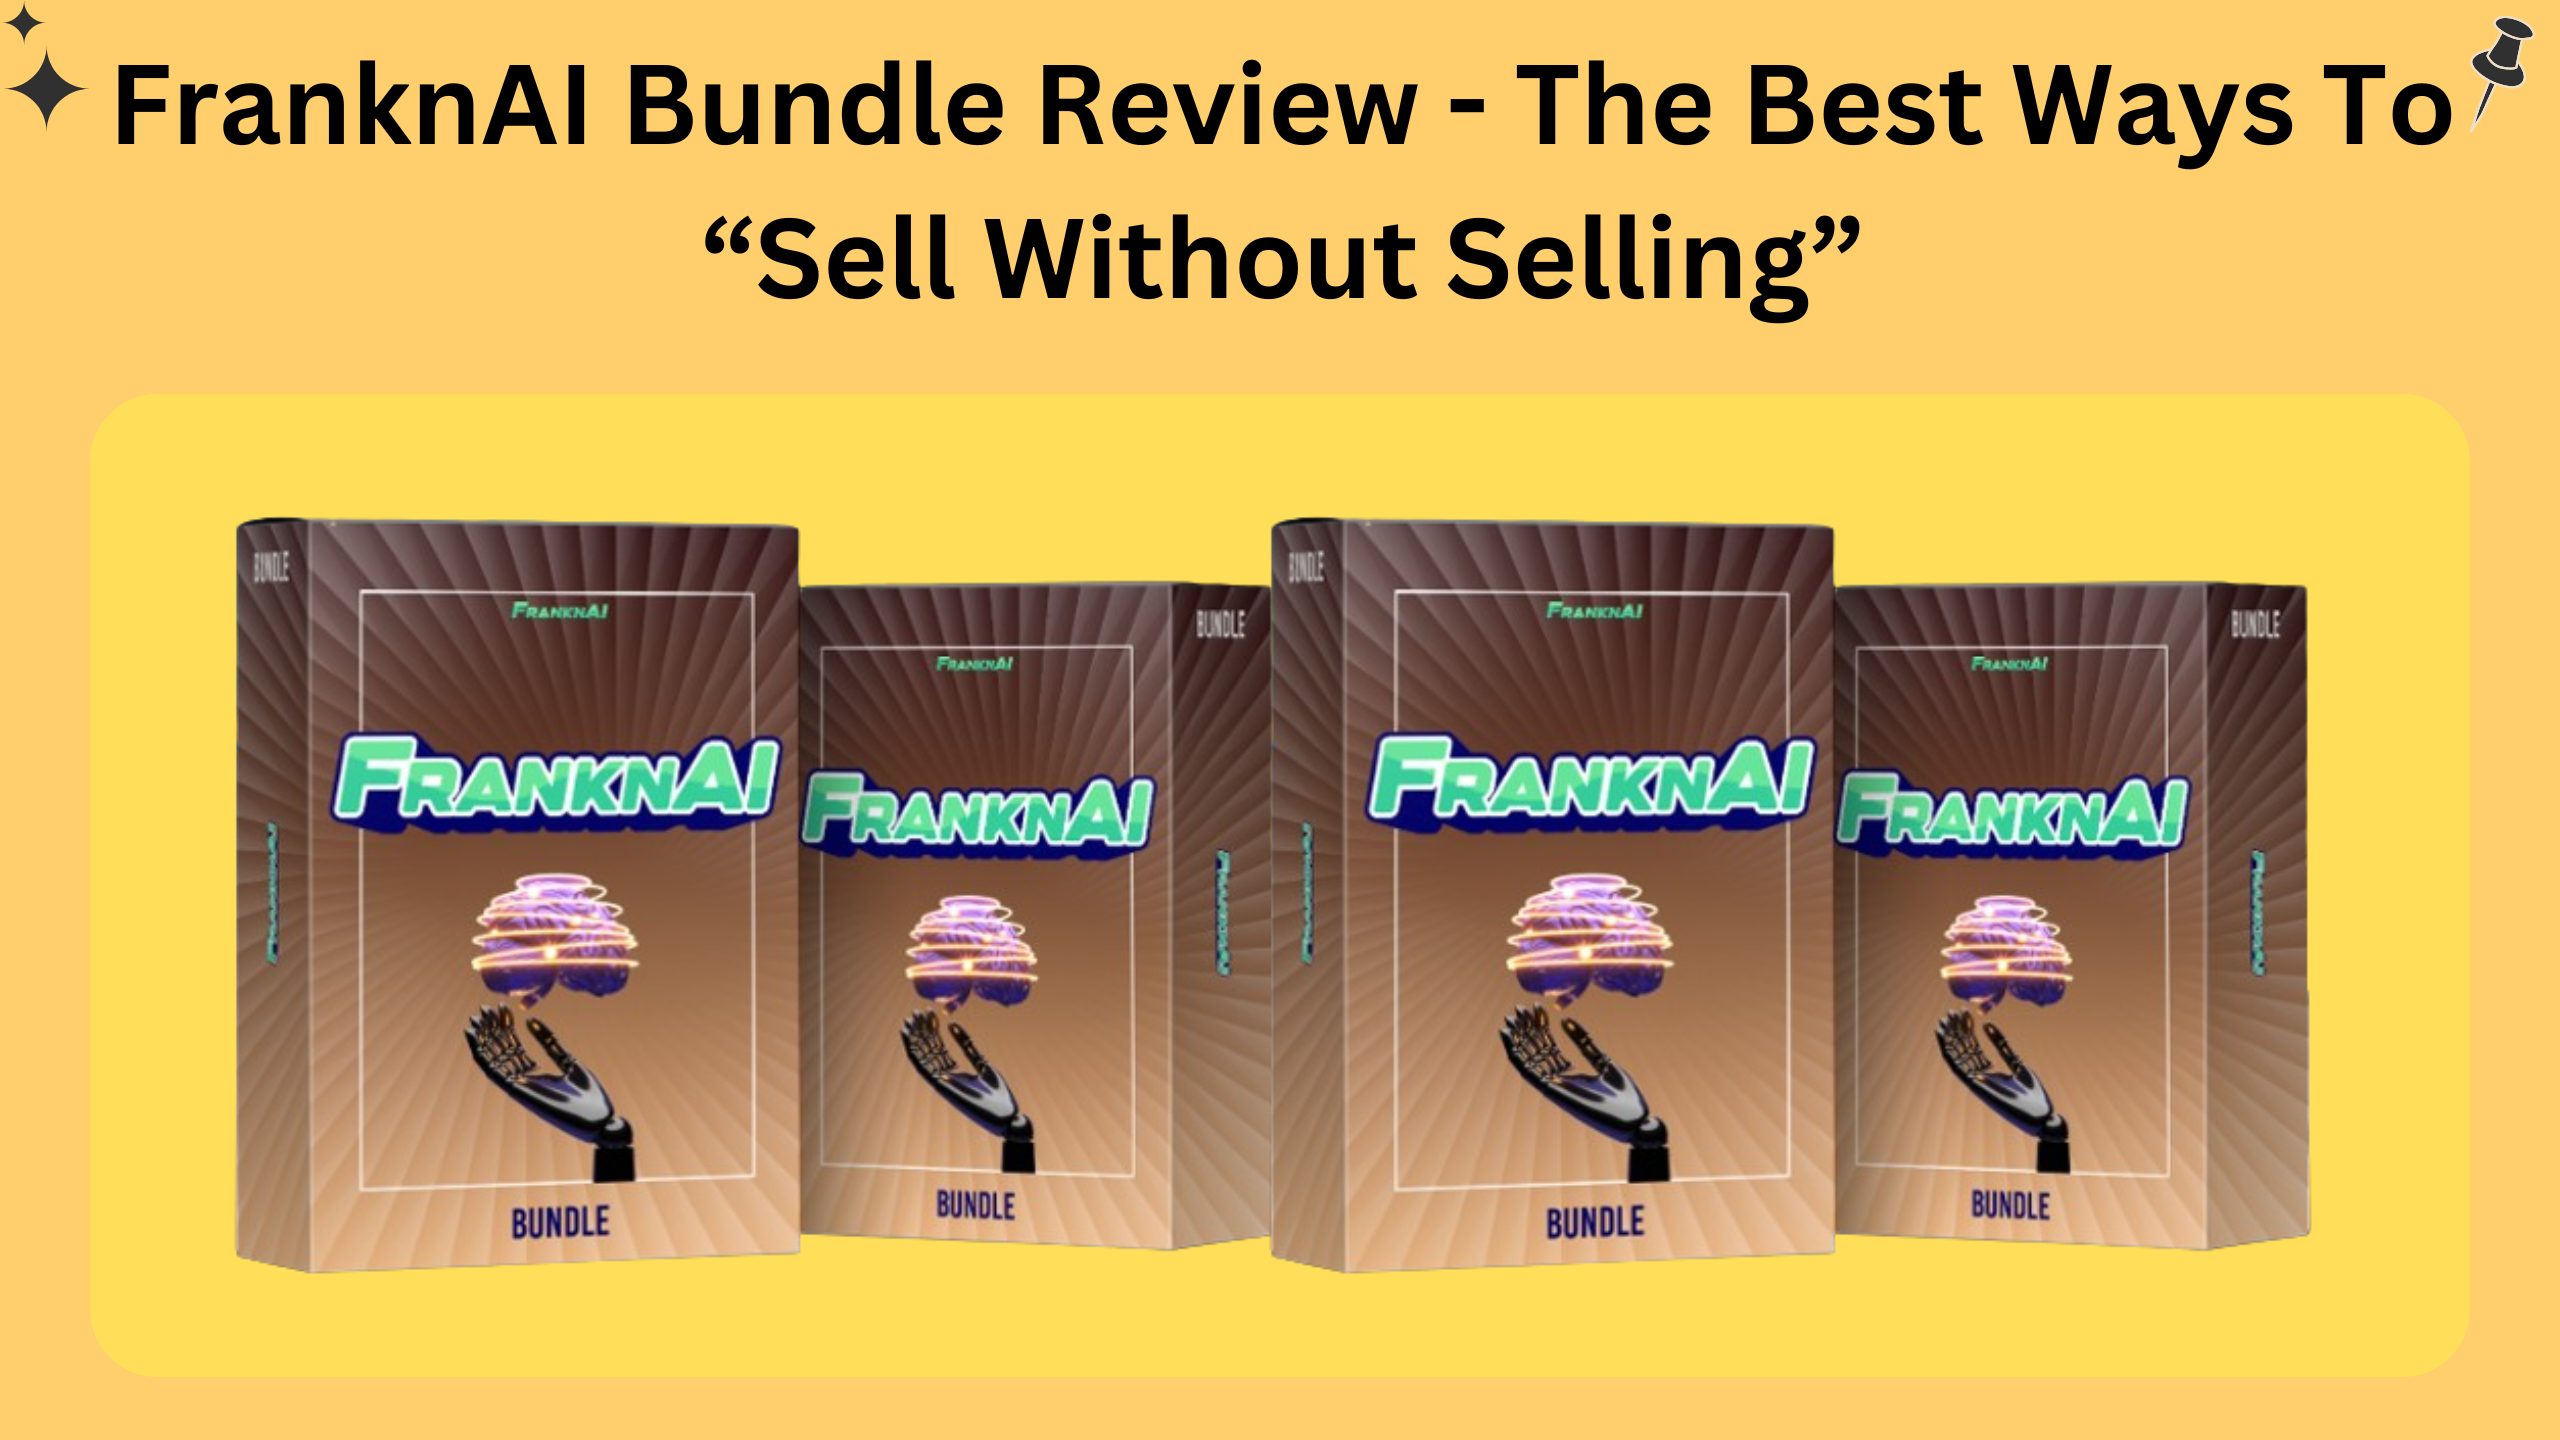 FranknAI Bundle Review - The Best Ways To “Sell Without Selling”